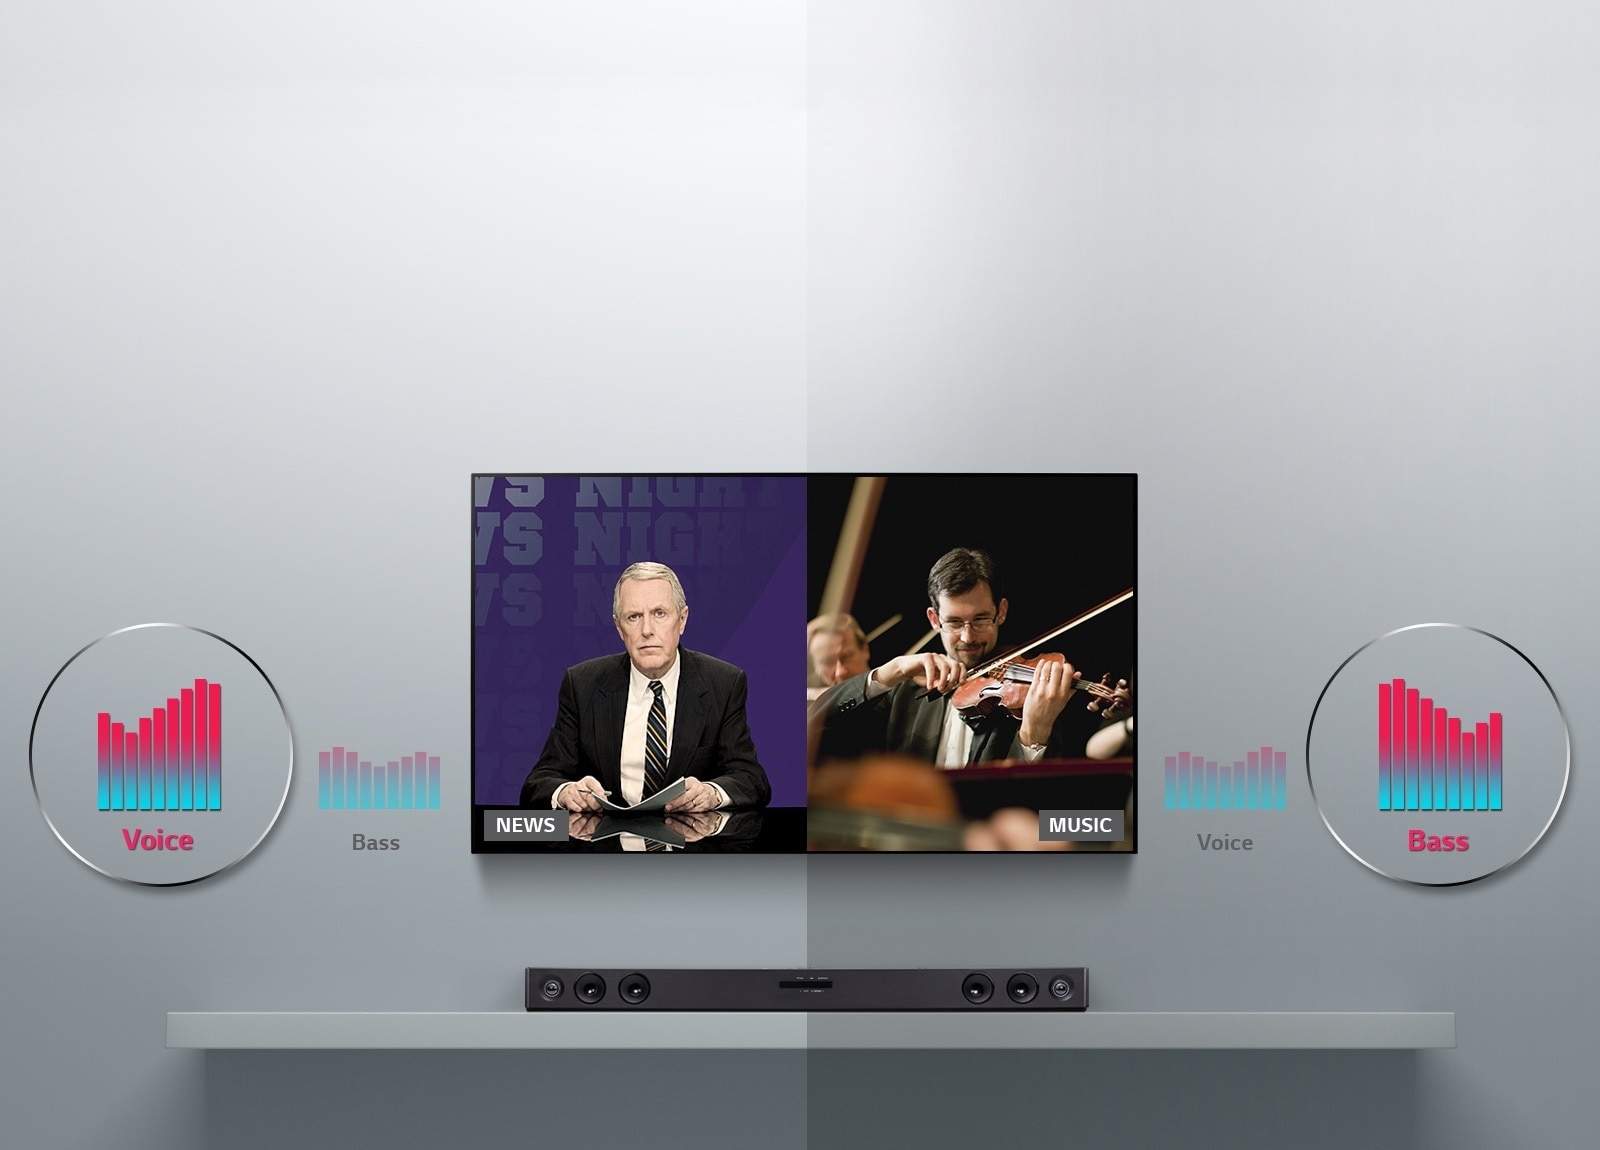 Adaptive Audio for what you Watch